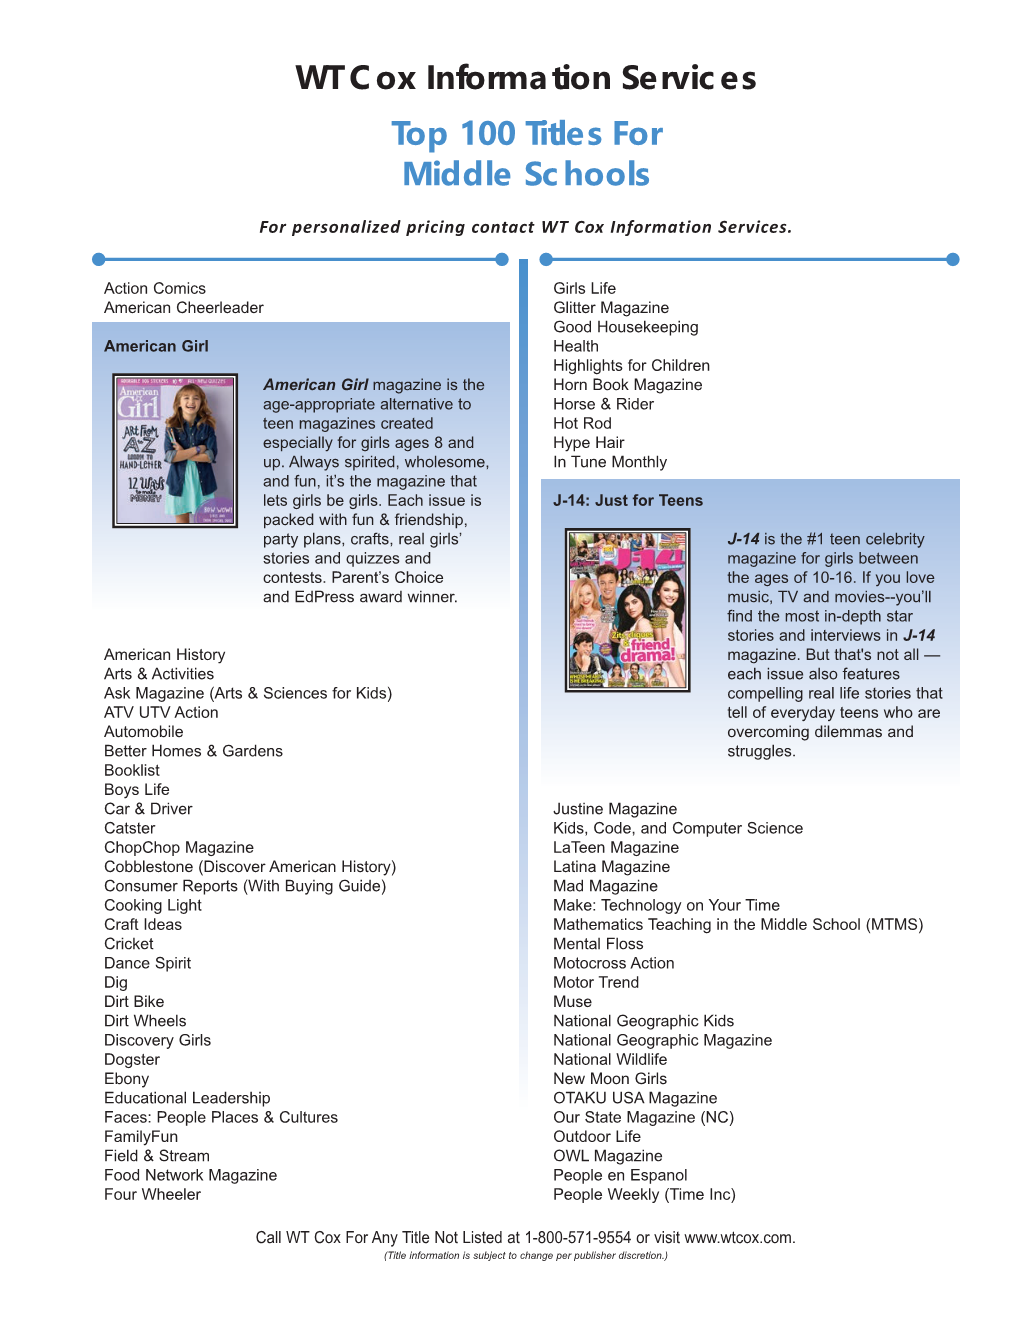 WT Cox Information Services Top 100 Titles for Middle Schools